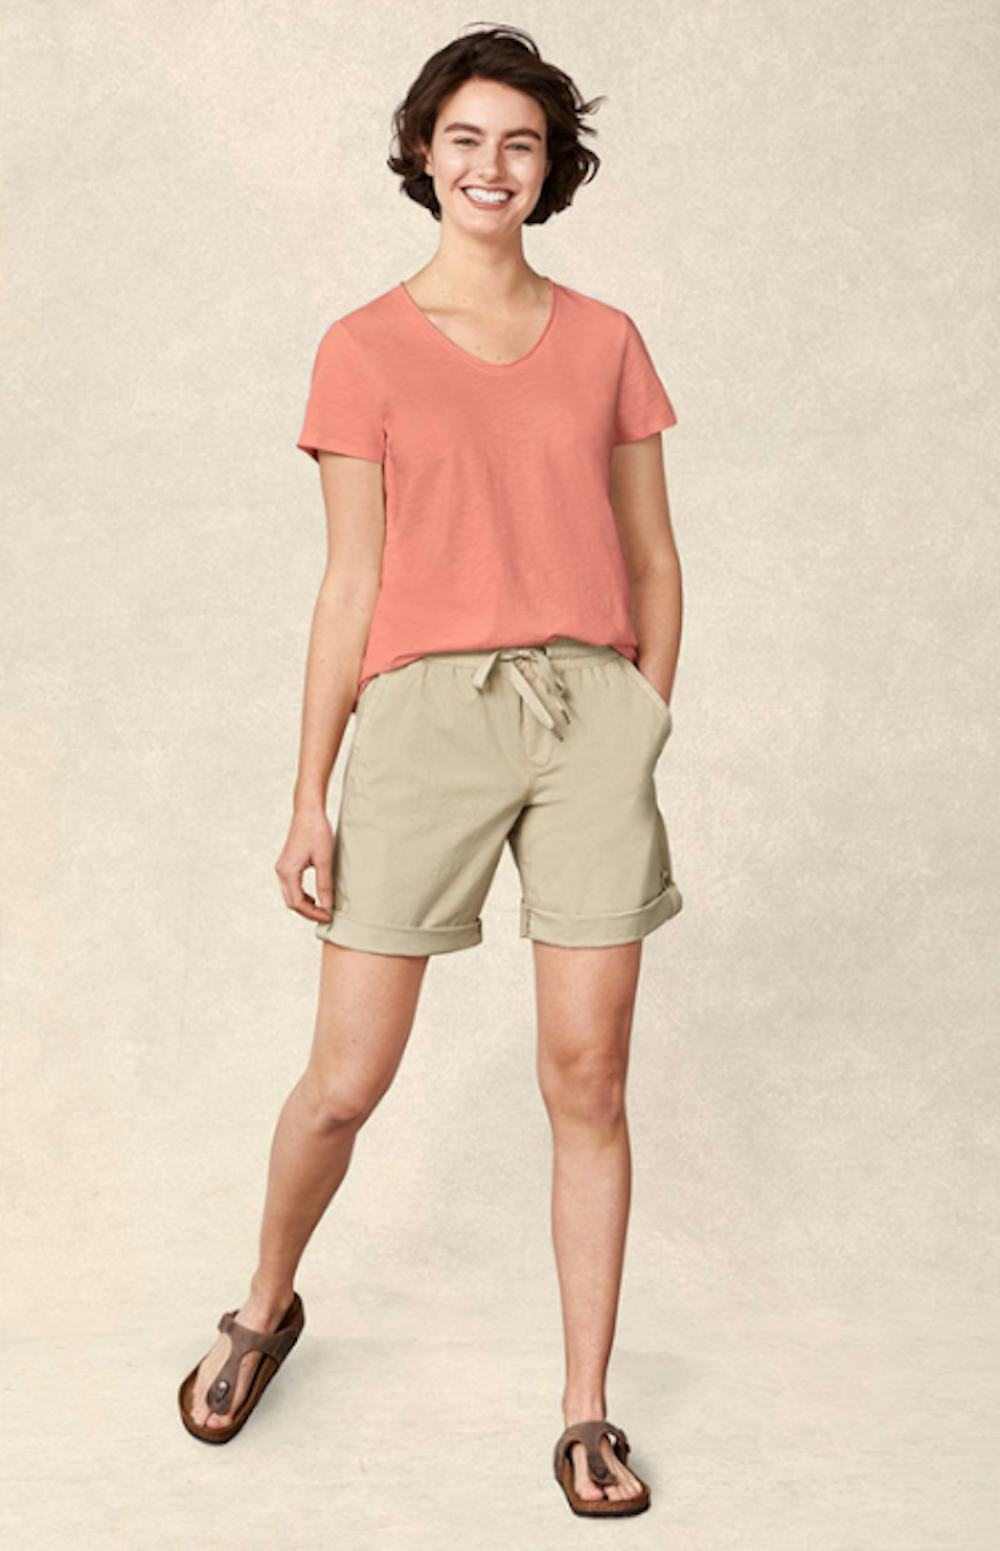 The Easygoing Short for Everyday